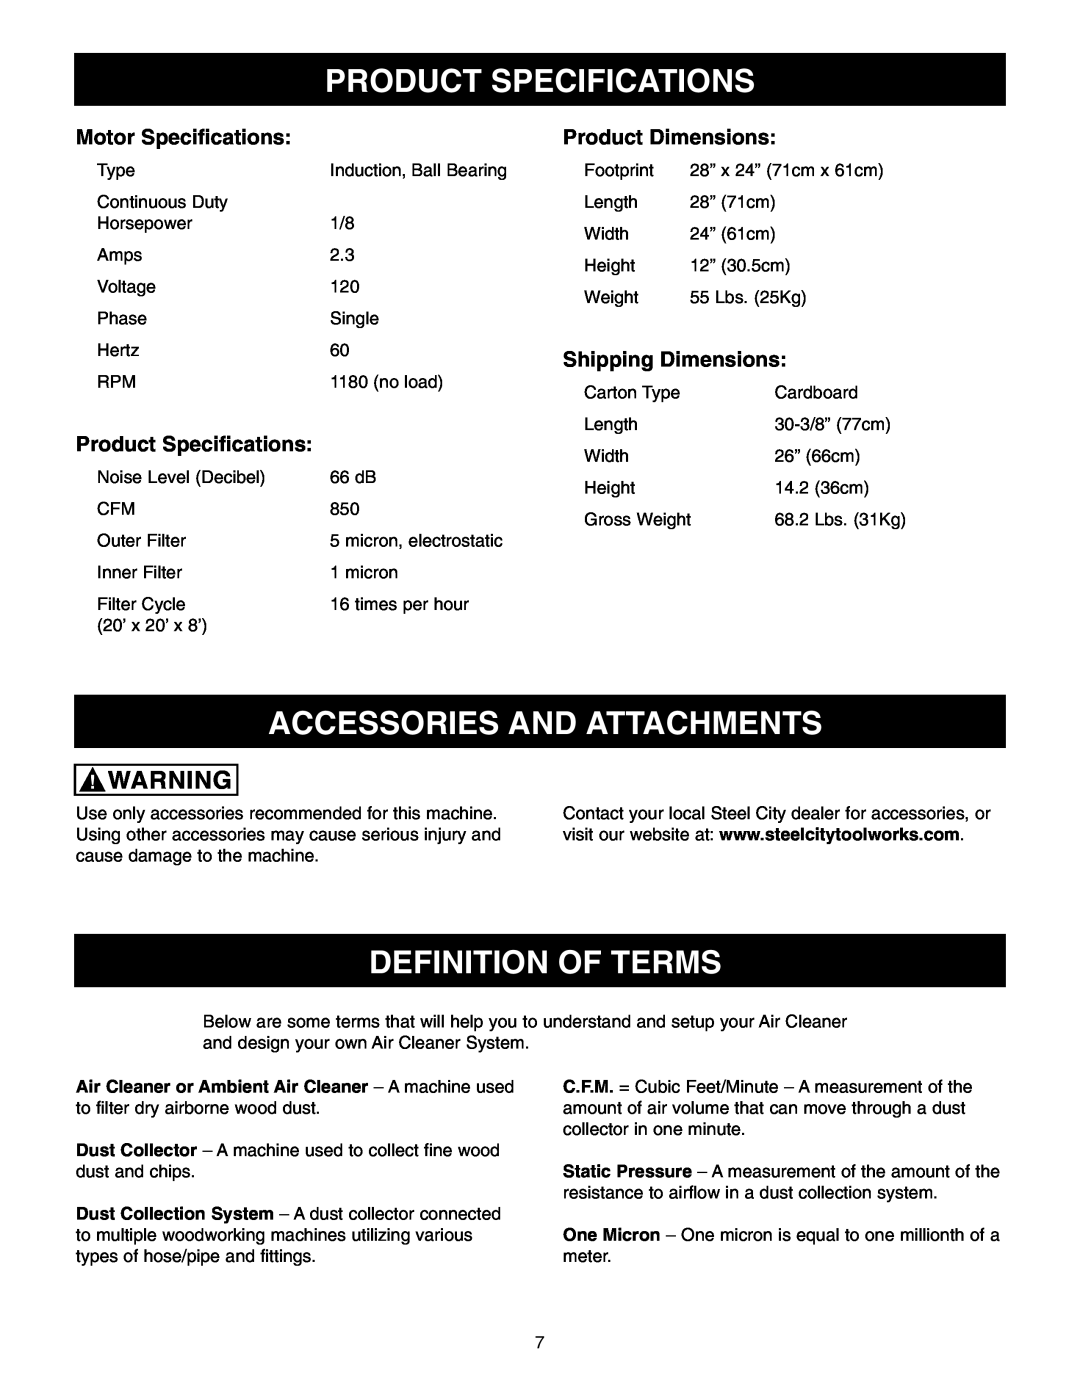 Craftsman 65100 user manual Product Specifications, Accessories And Attachments, Definition Of Terms, Motor Specifications 